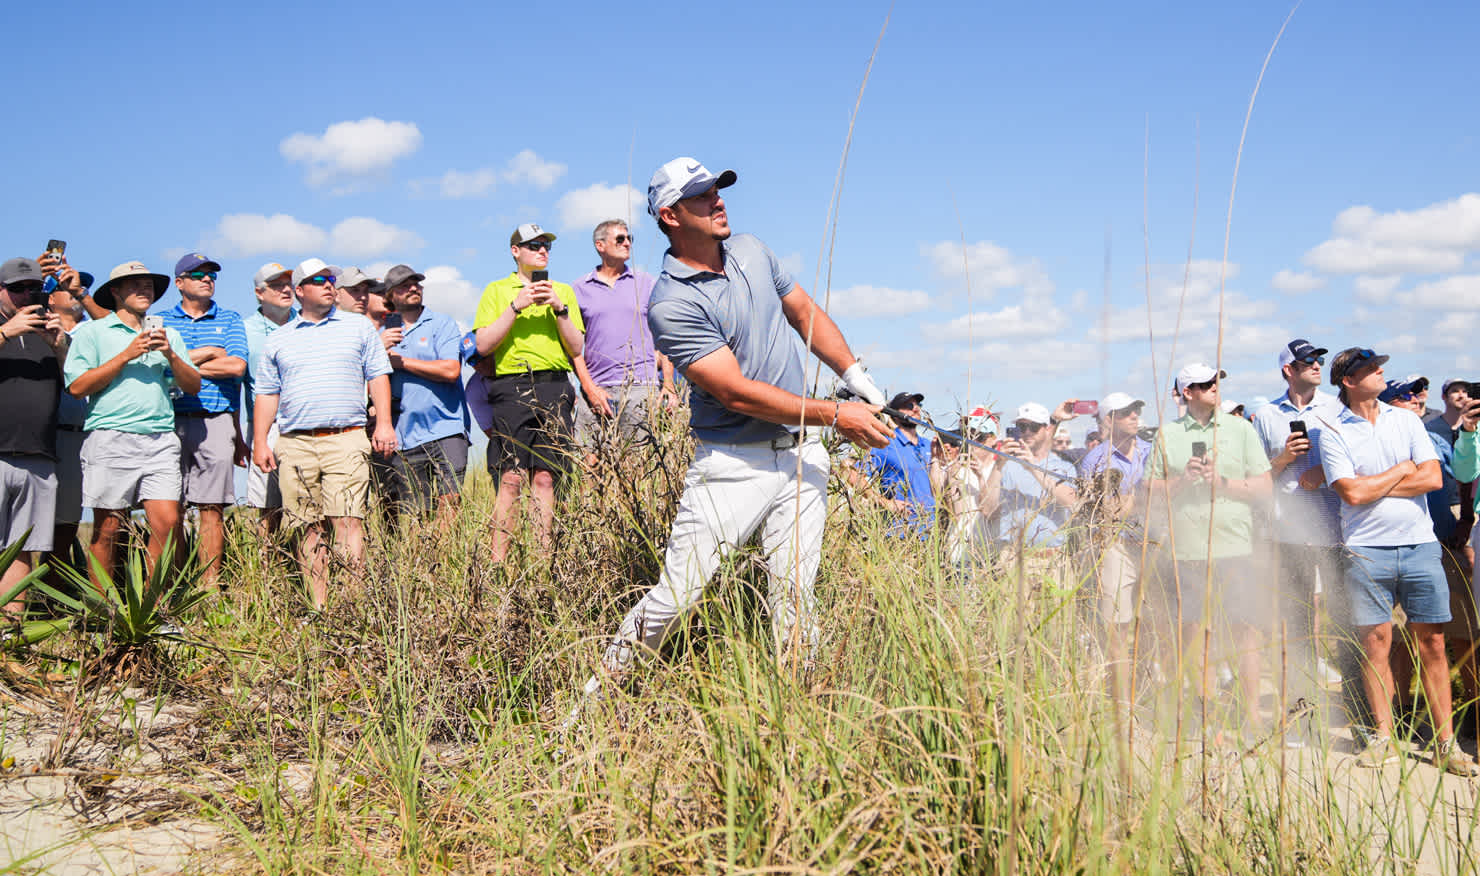 Brooks Koepka's knee seemingly stood up well en route to an opening 69, even in Kiawah's rugged wastelands.